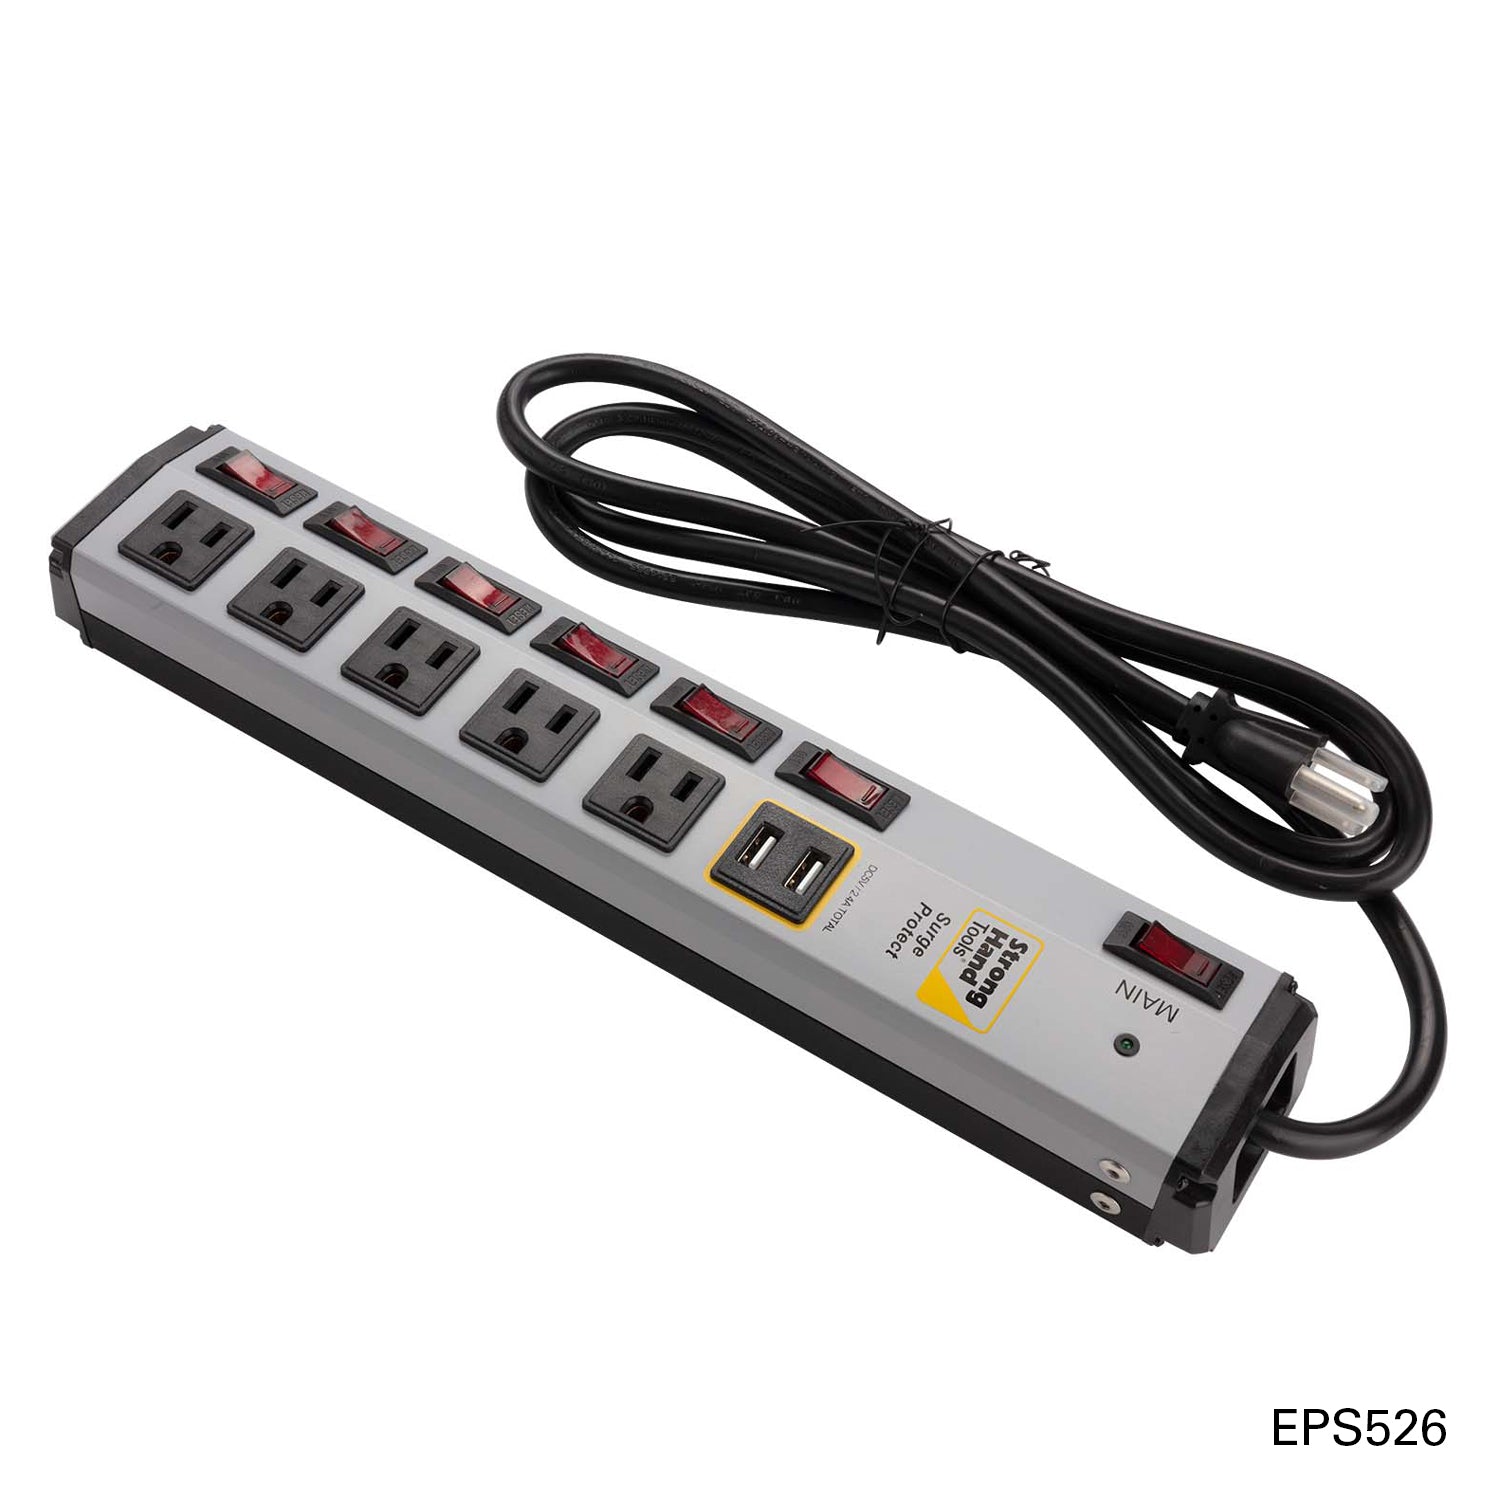 Surge Protector Power Strips w/ USB Port, Metal Case – Strong Hand